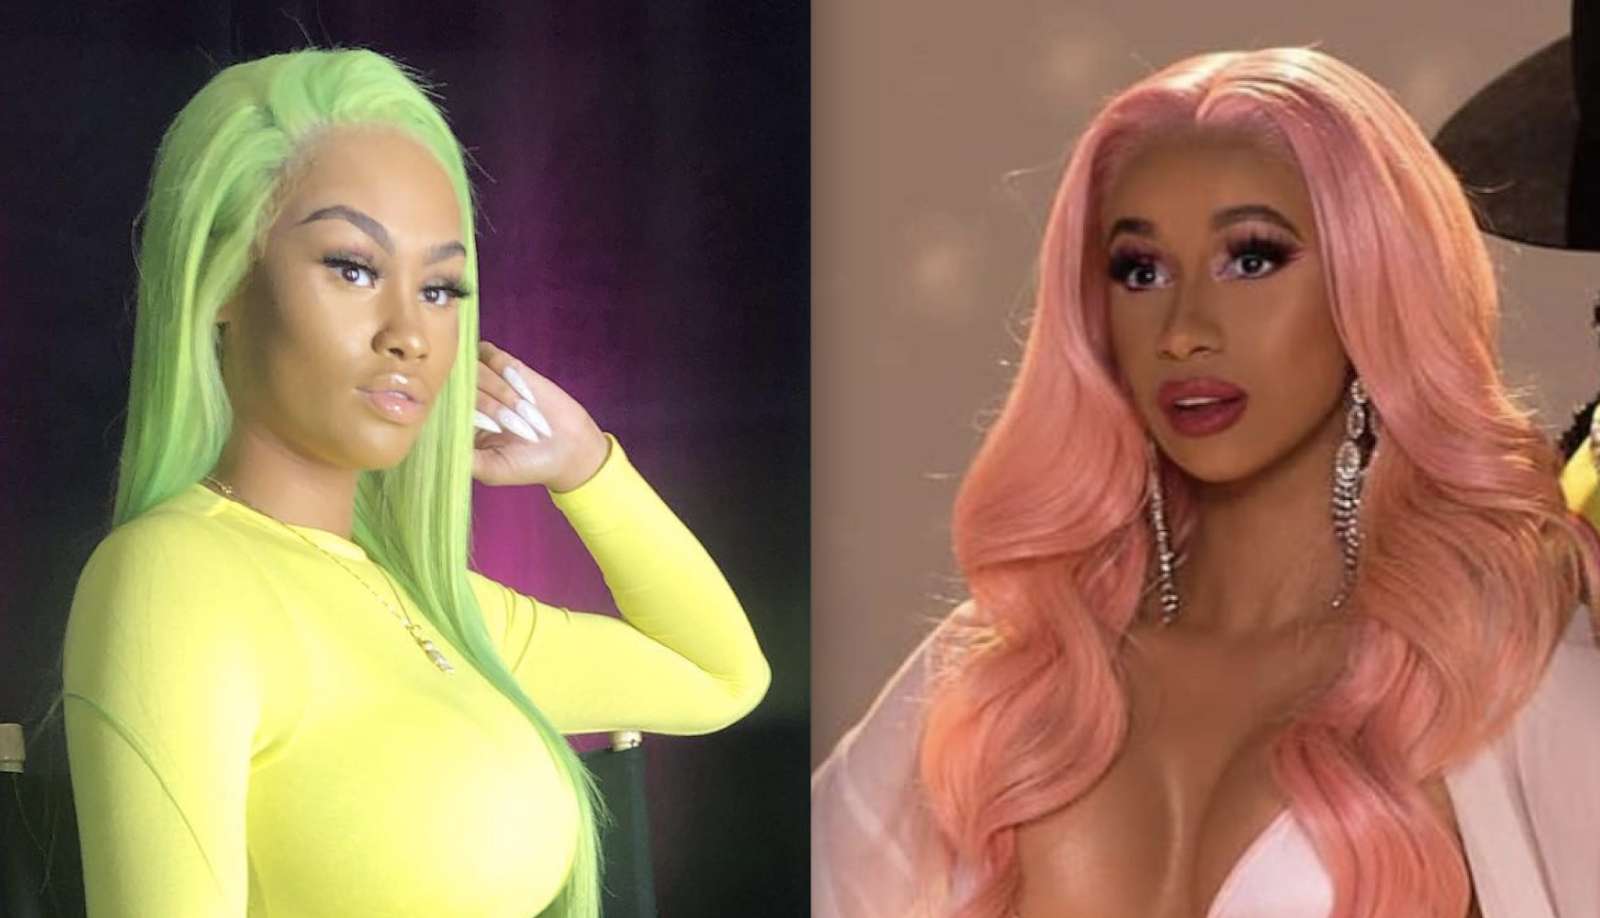 Summer Bunni Drops A Scathing New Diss Track About Cardi B And Offset | Celebrity Insider